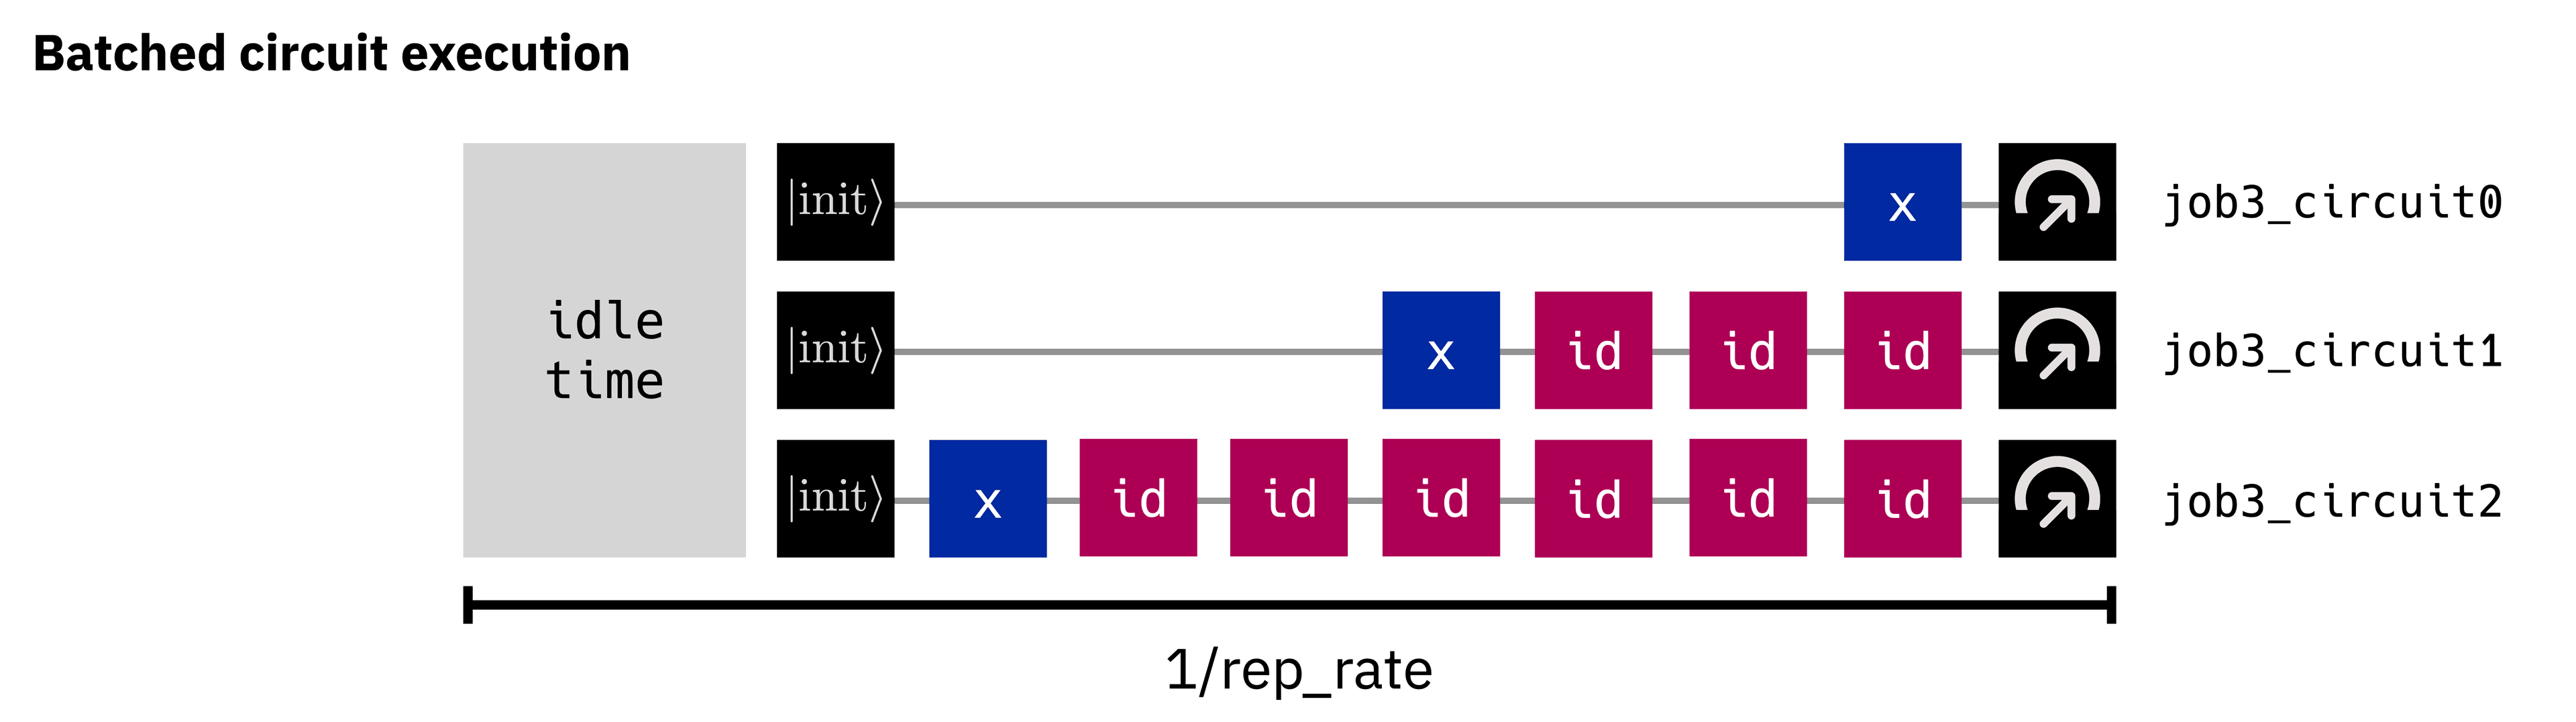 The image shows three circuits.  Although they are different lengths, they take the same amount of time to complete because they were submitted in a batch.